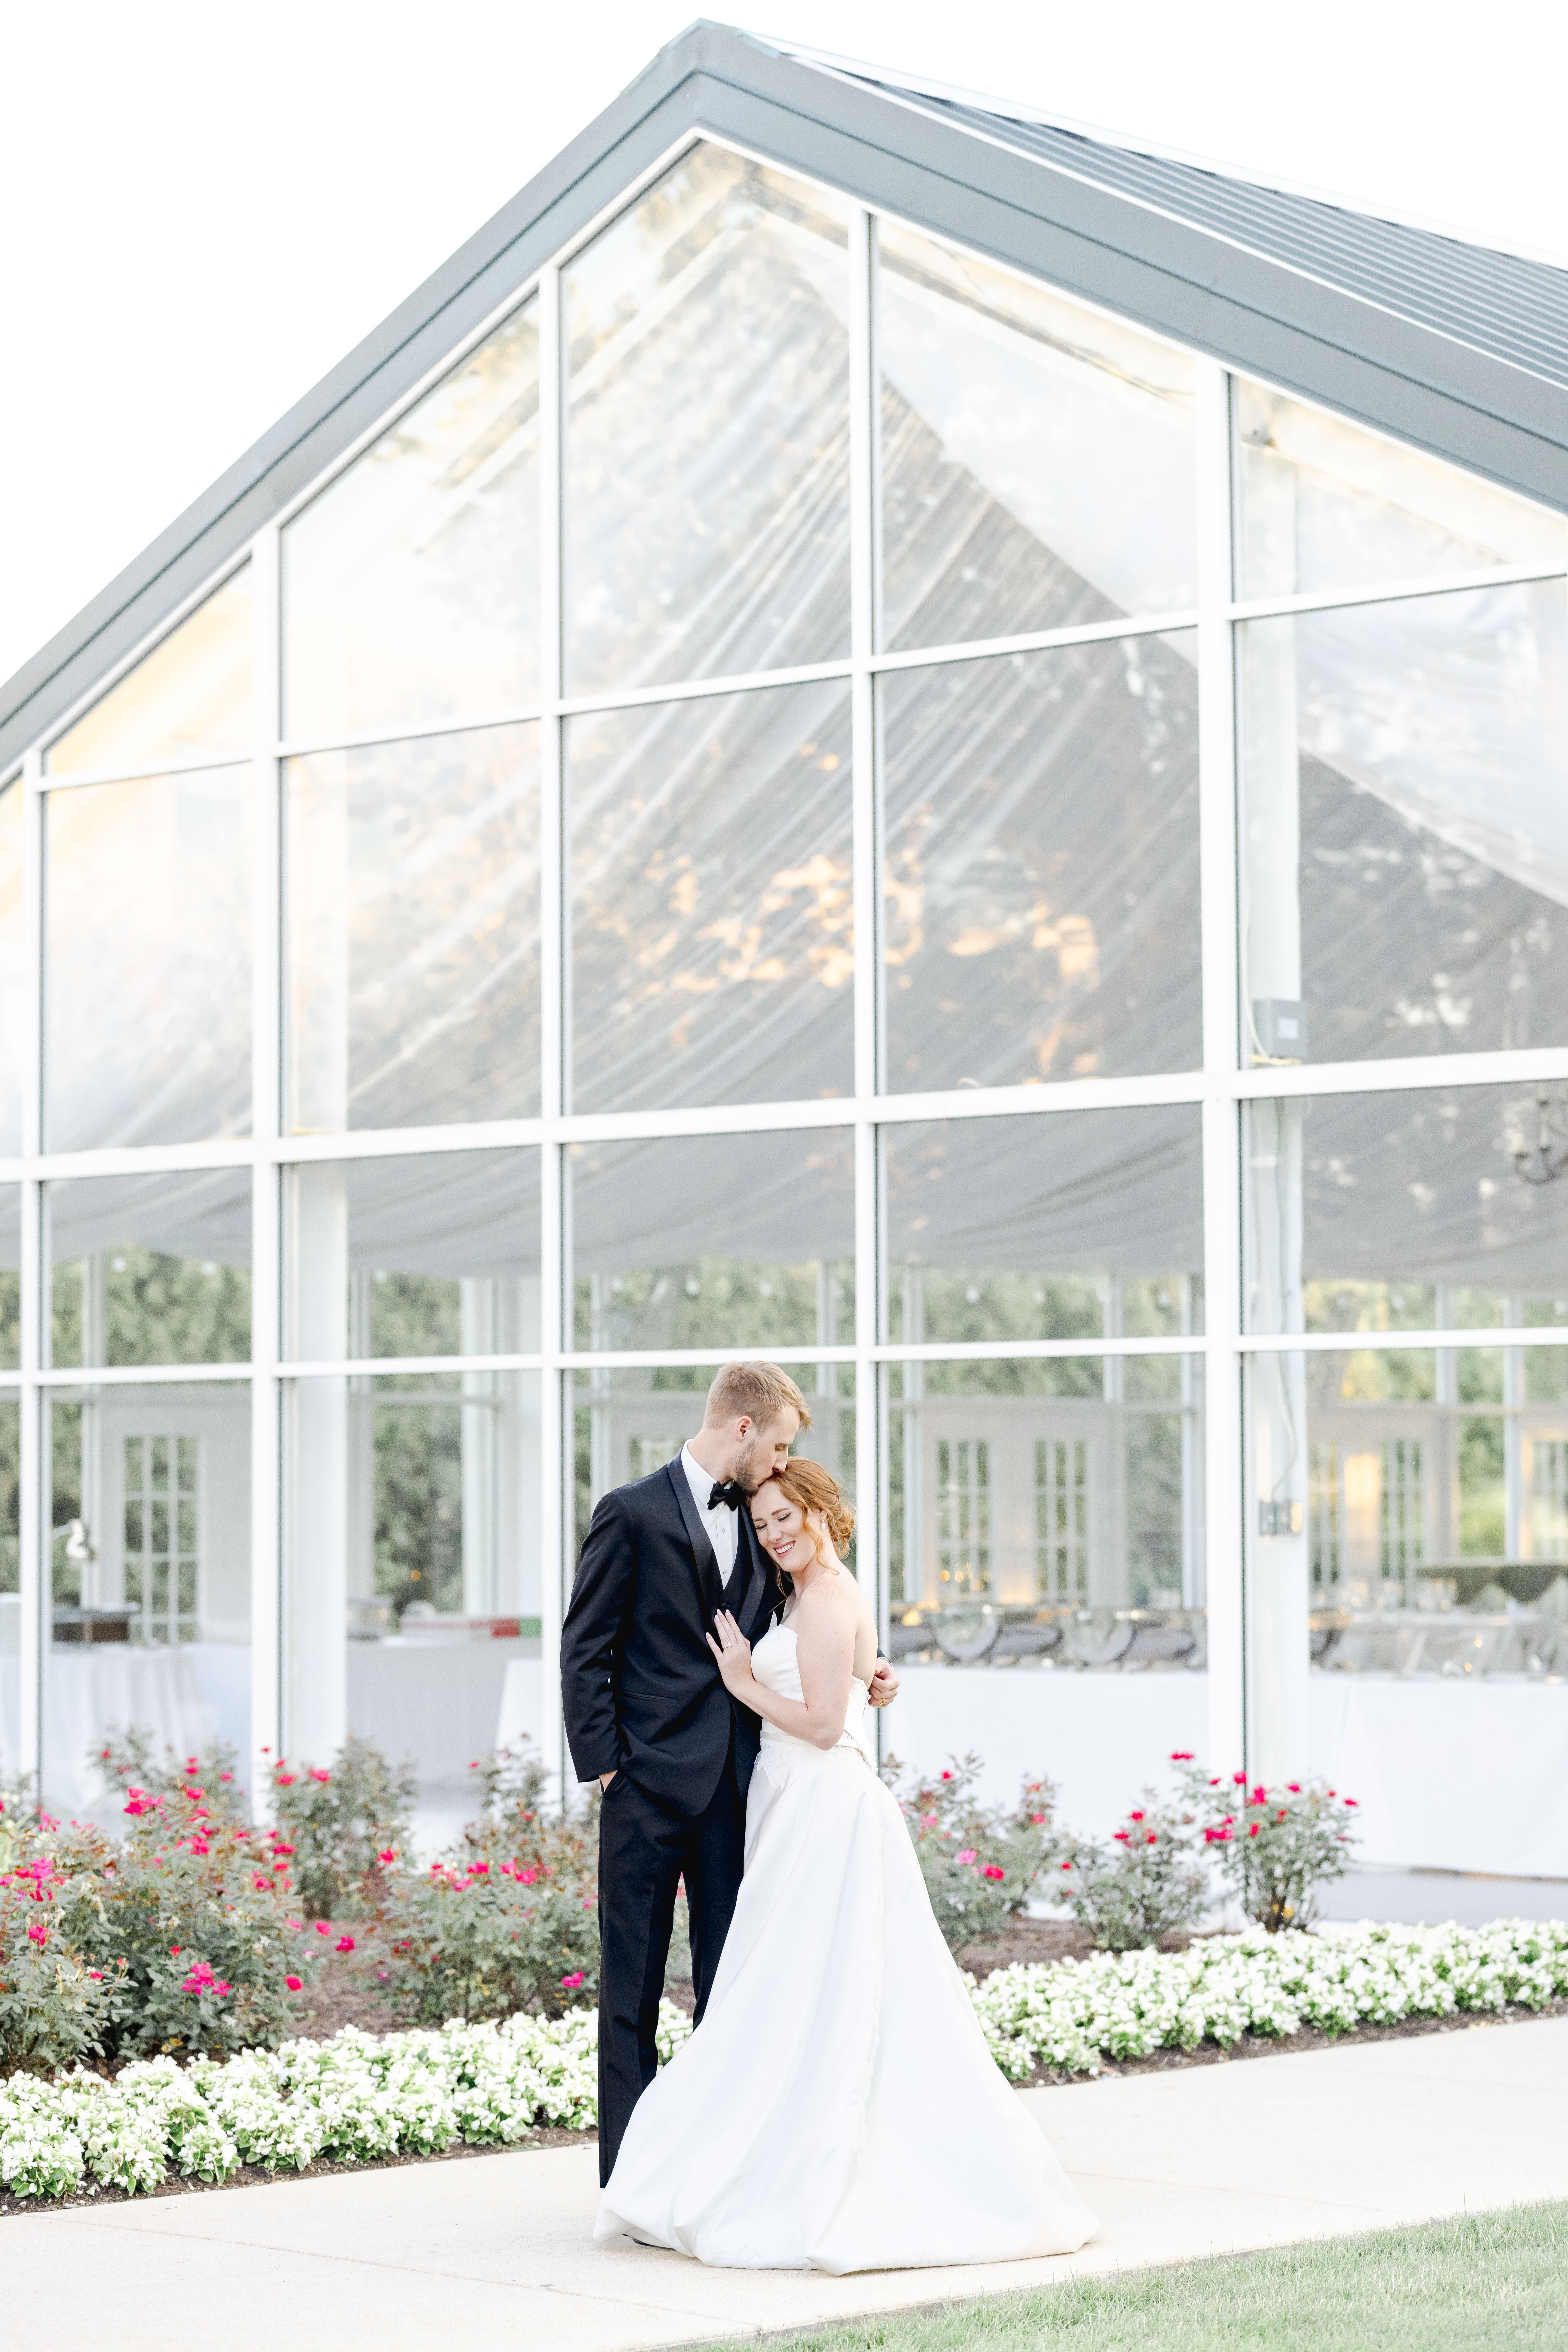 A Timeless Ritz Charles Wedding Day